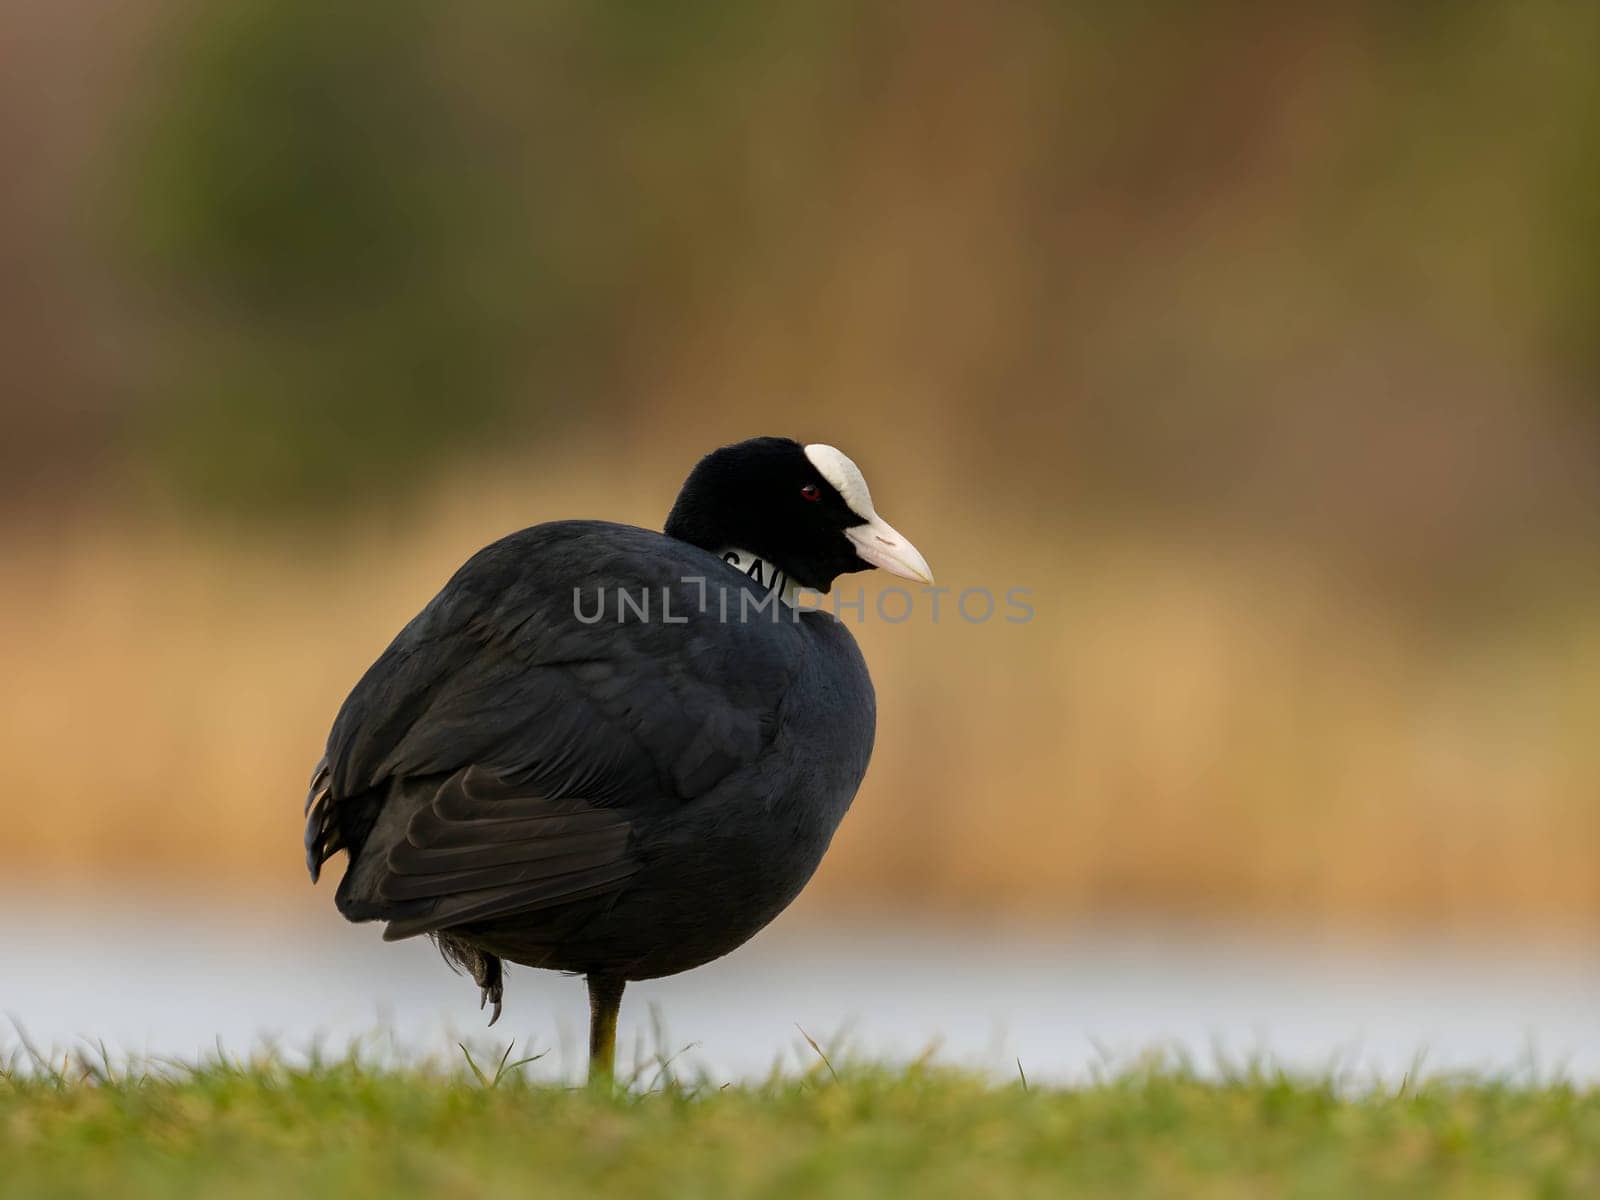 Close-up photo of an Eurasian Coot on grass with a blurry background.